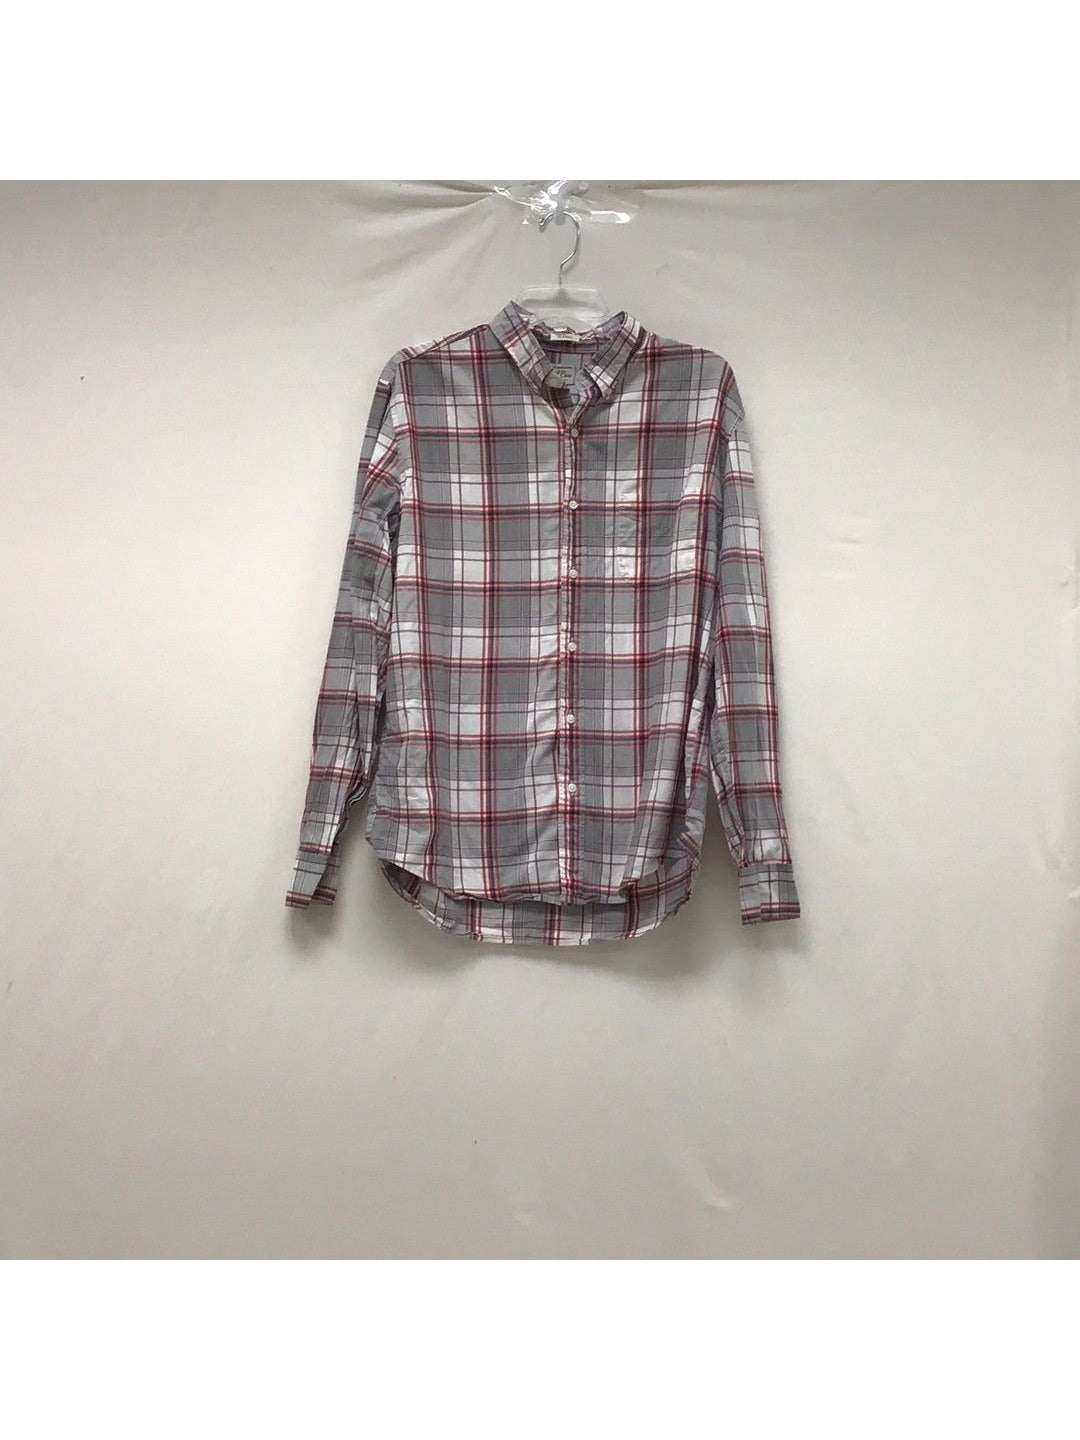 J. Crew Men's Red & Gray Flannel Shirt - The Kennedy Collective Thrift - 